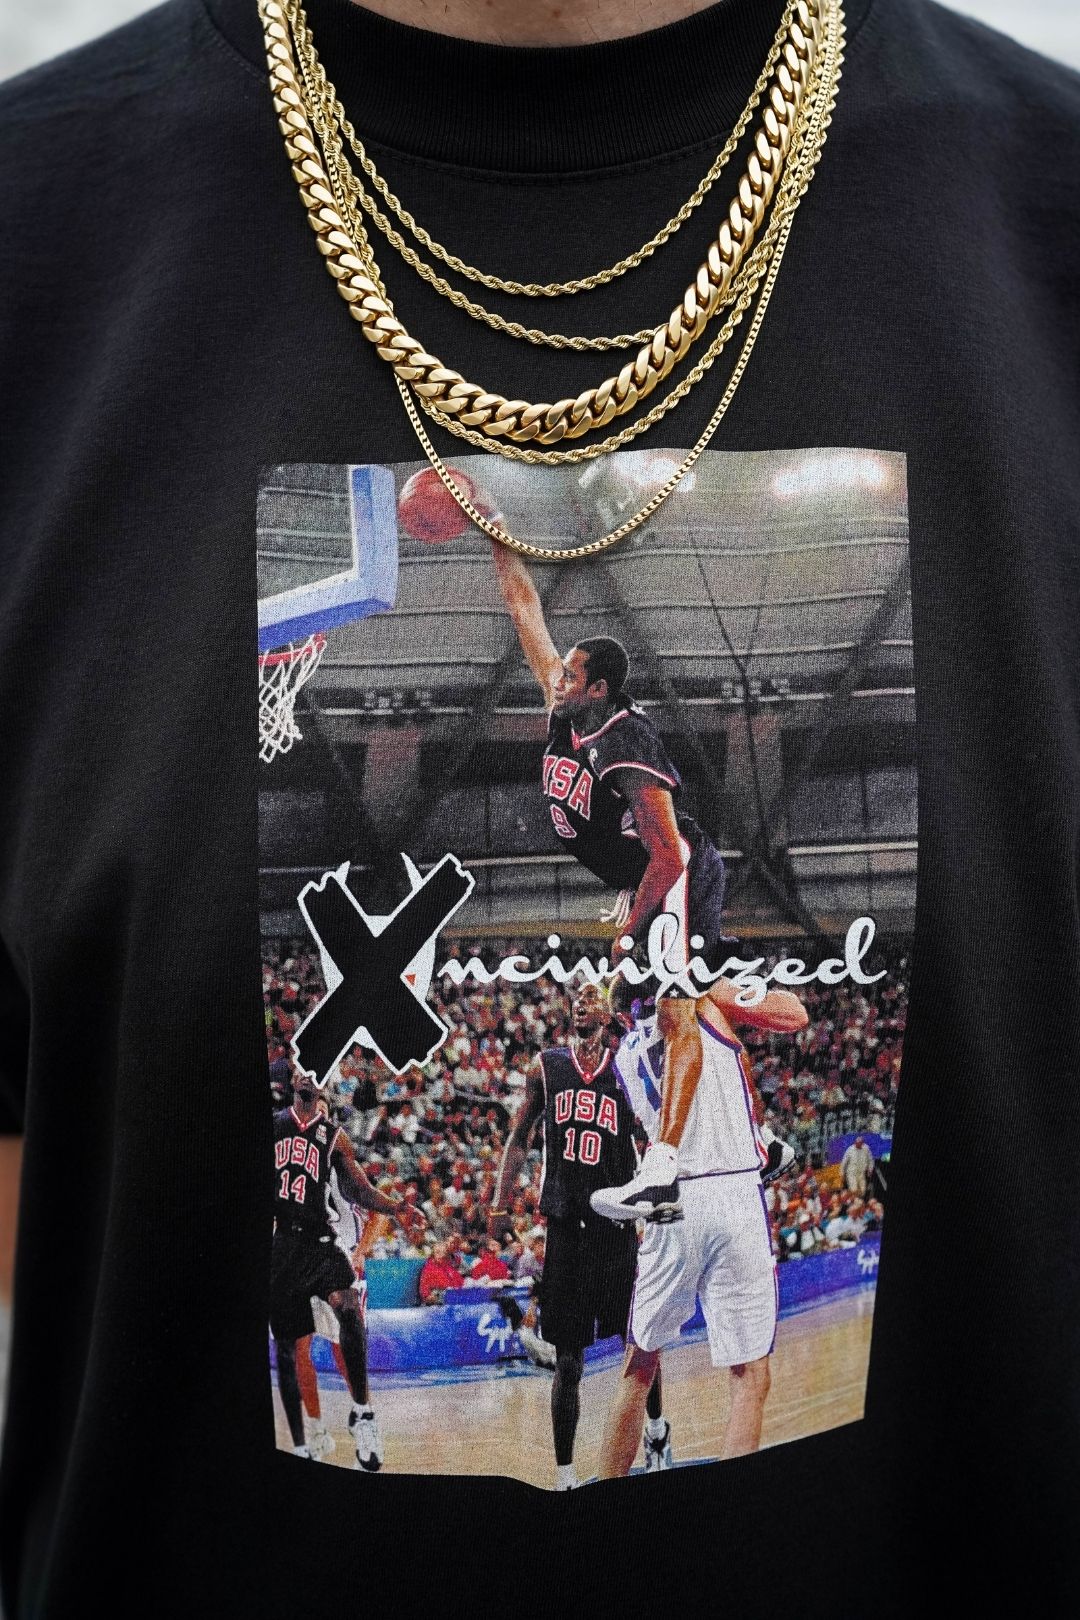 EARLY ACCESS: UNCIVILIZED "VINSANITY" T-SHIRT